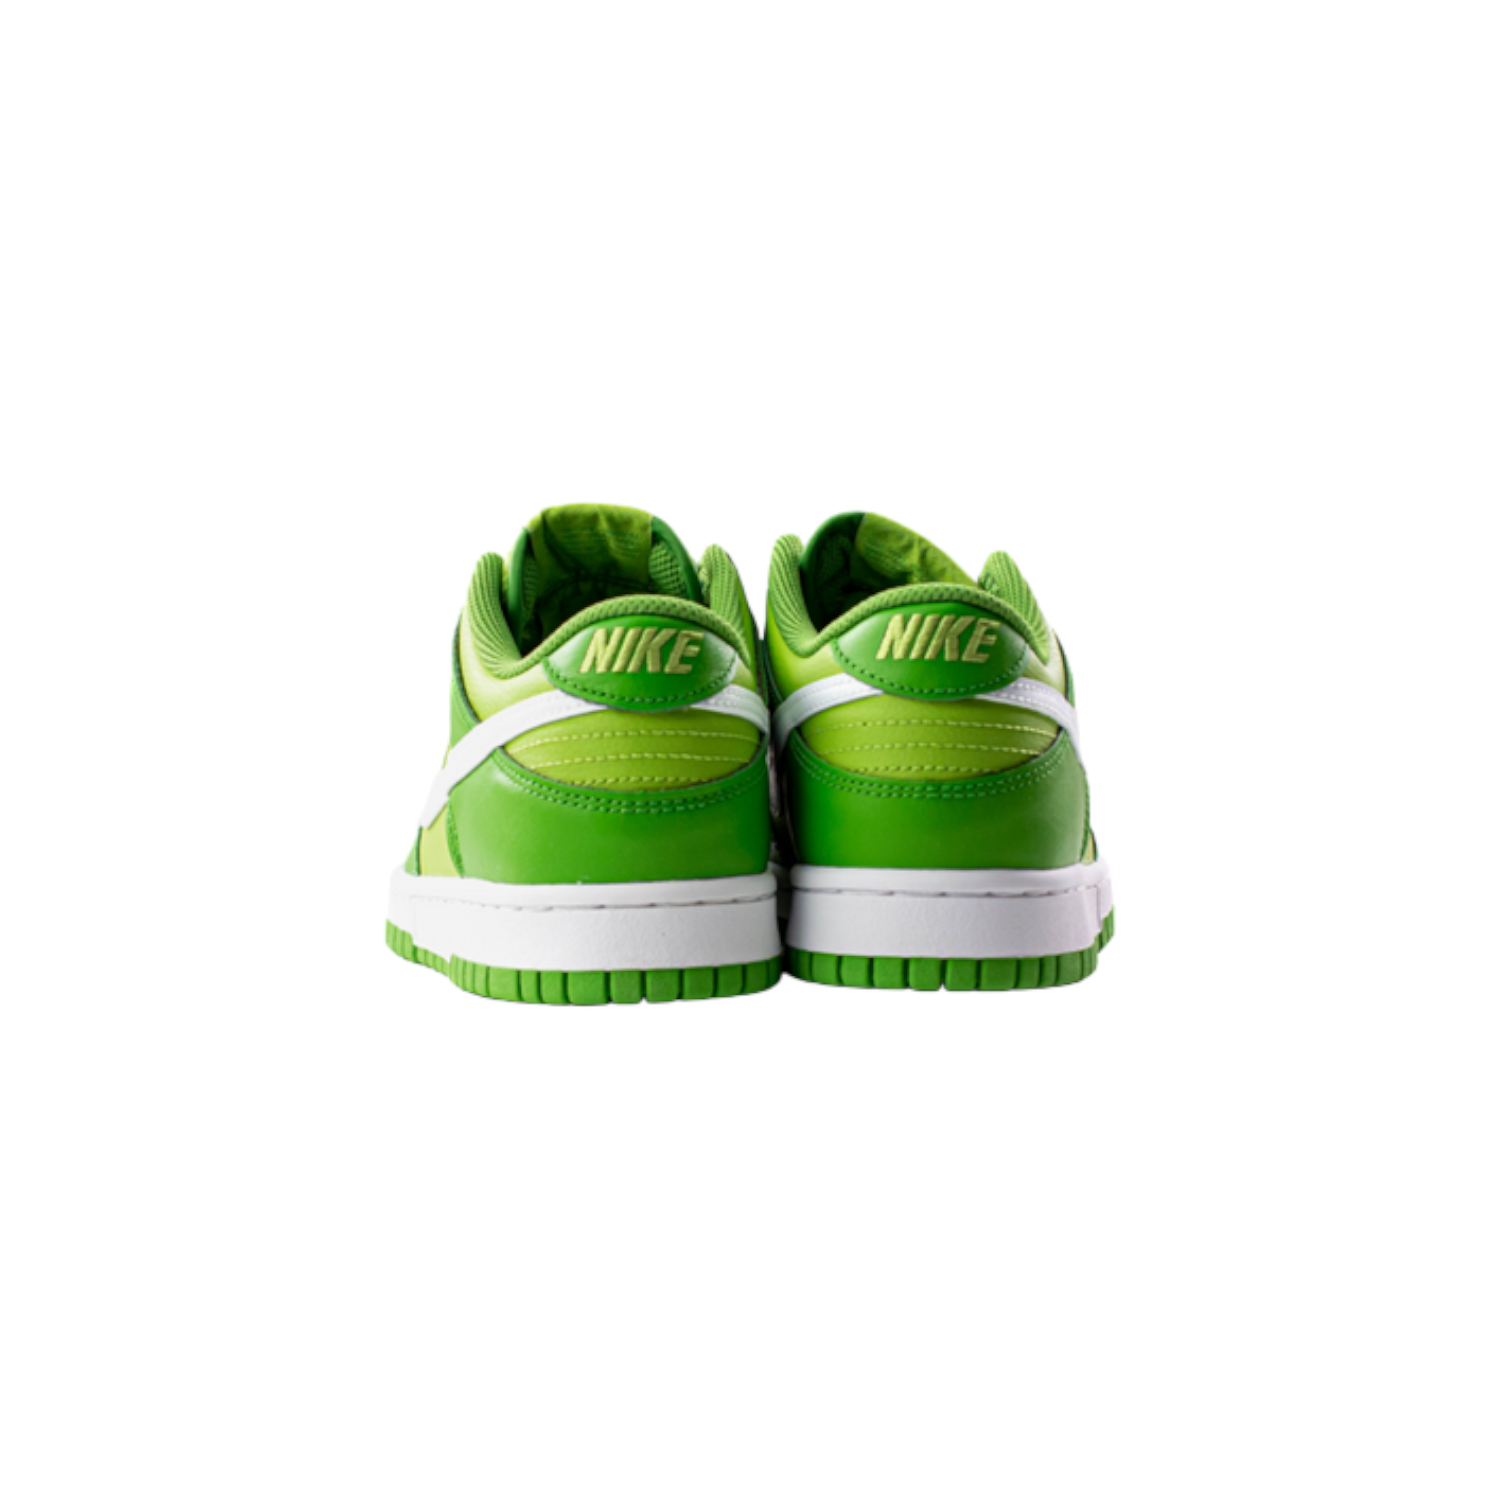 Nike SB Dunk Low Chlorophyll for Sale, Authenticity Guaranteed